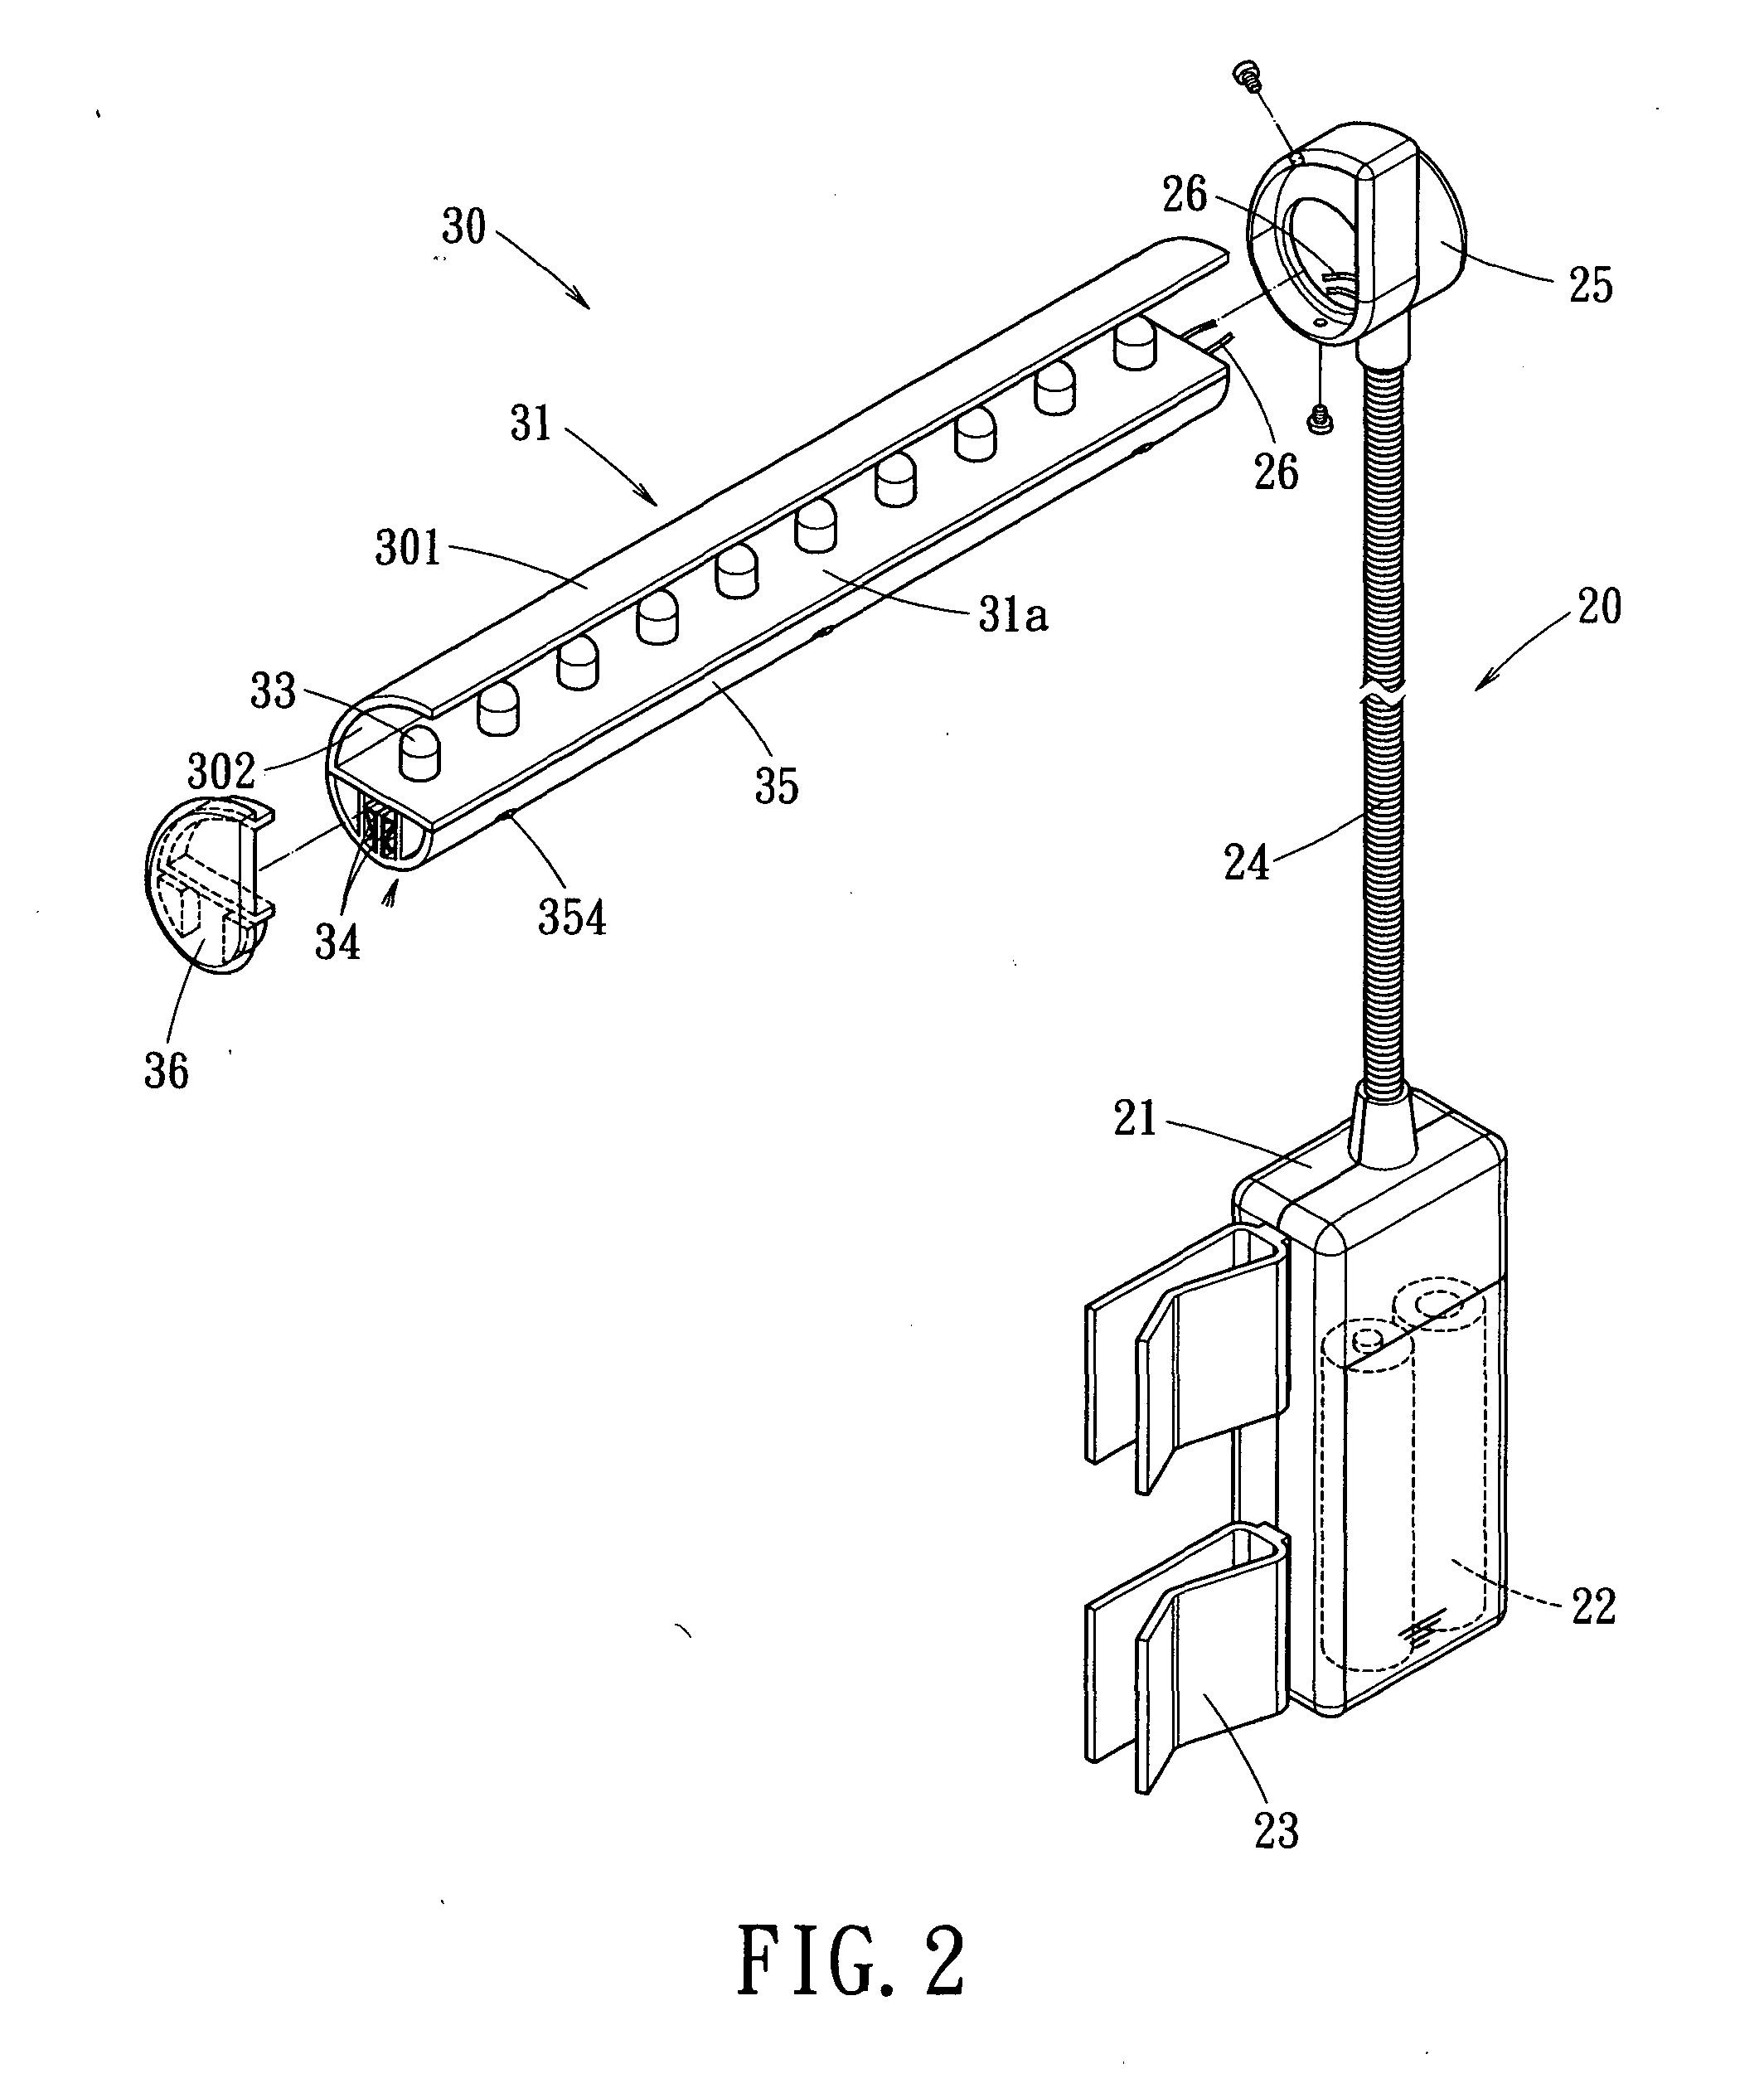 Lamp structure for an electrical device